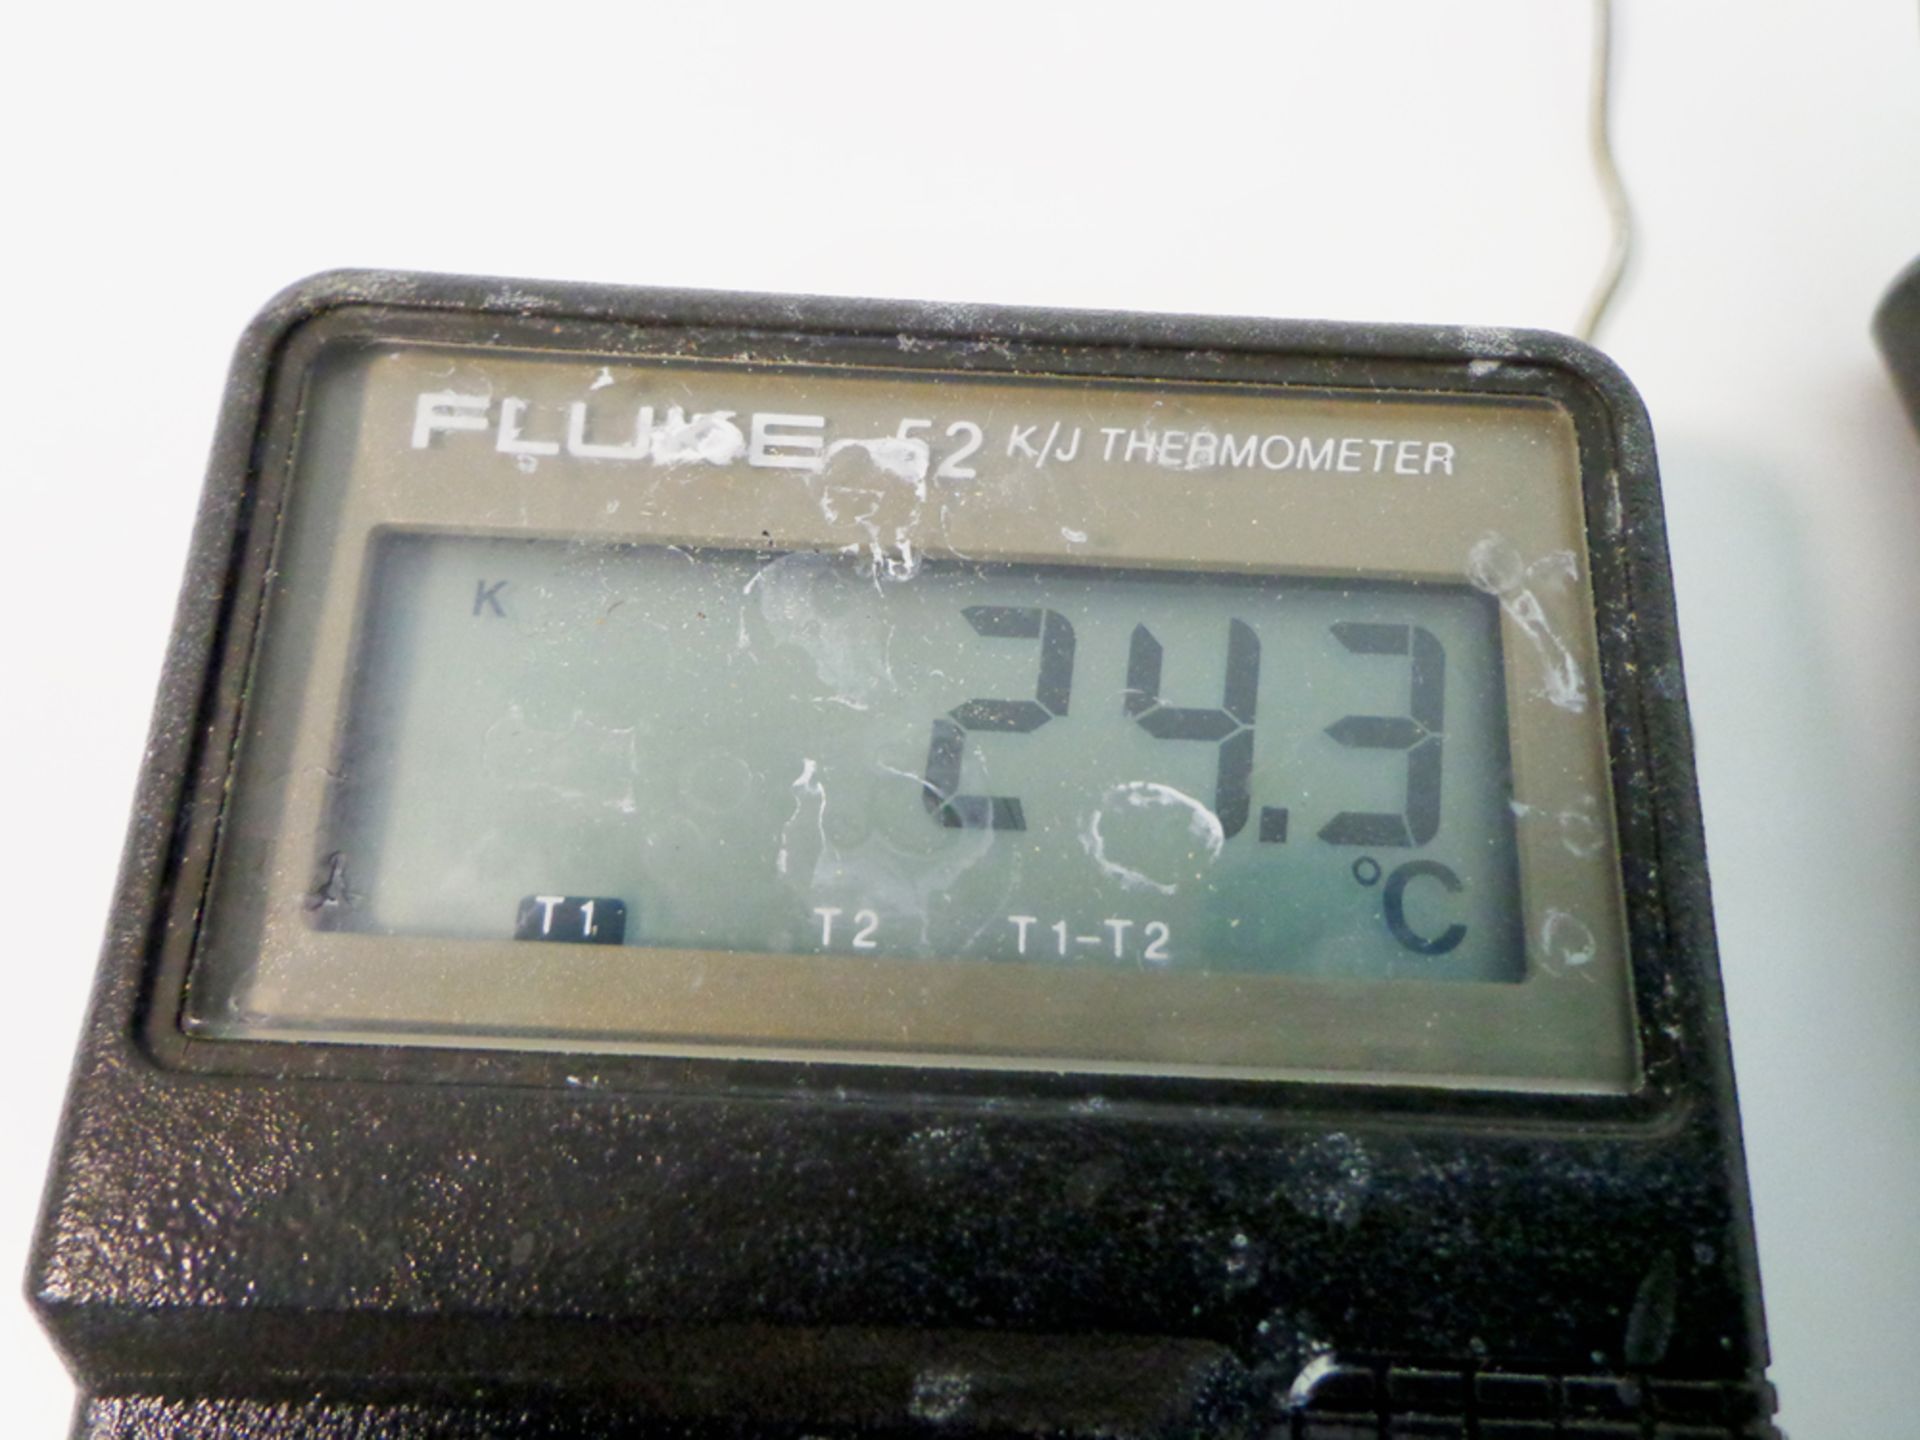 Fluke Model 52 K/J Thermometer and Thermocouple with Probe, S/N 5870183 - Image 2 of 5